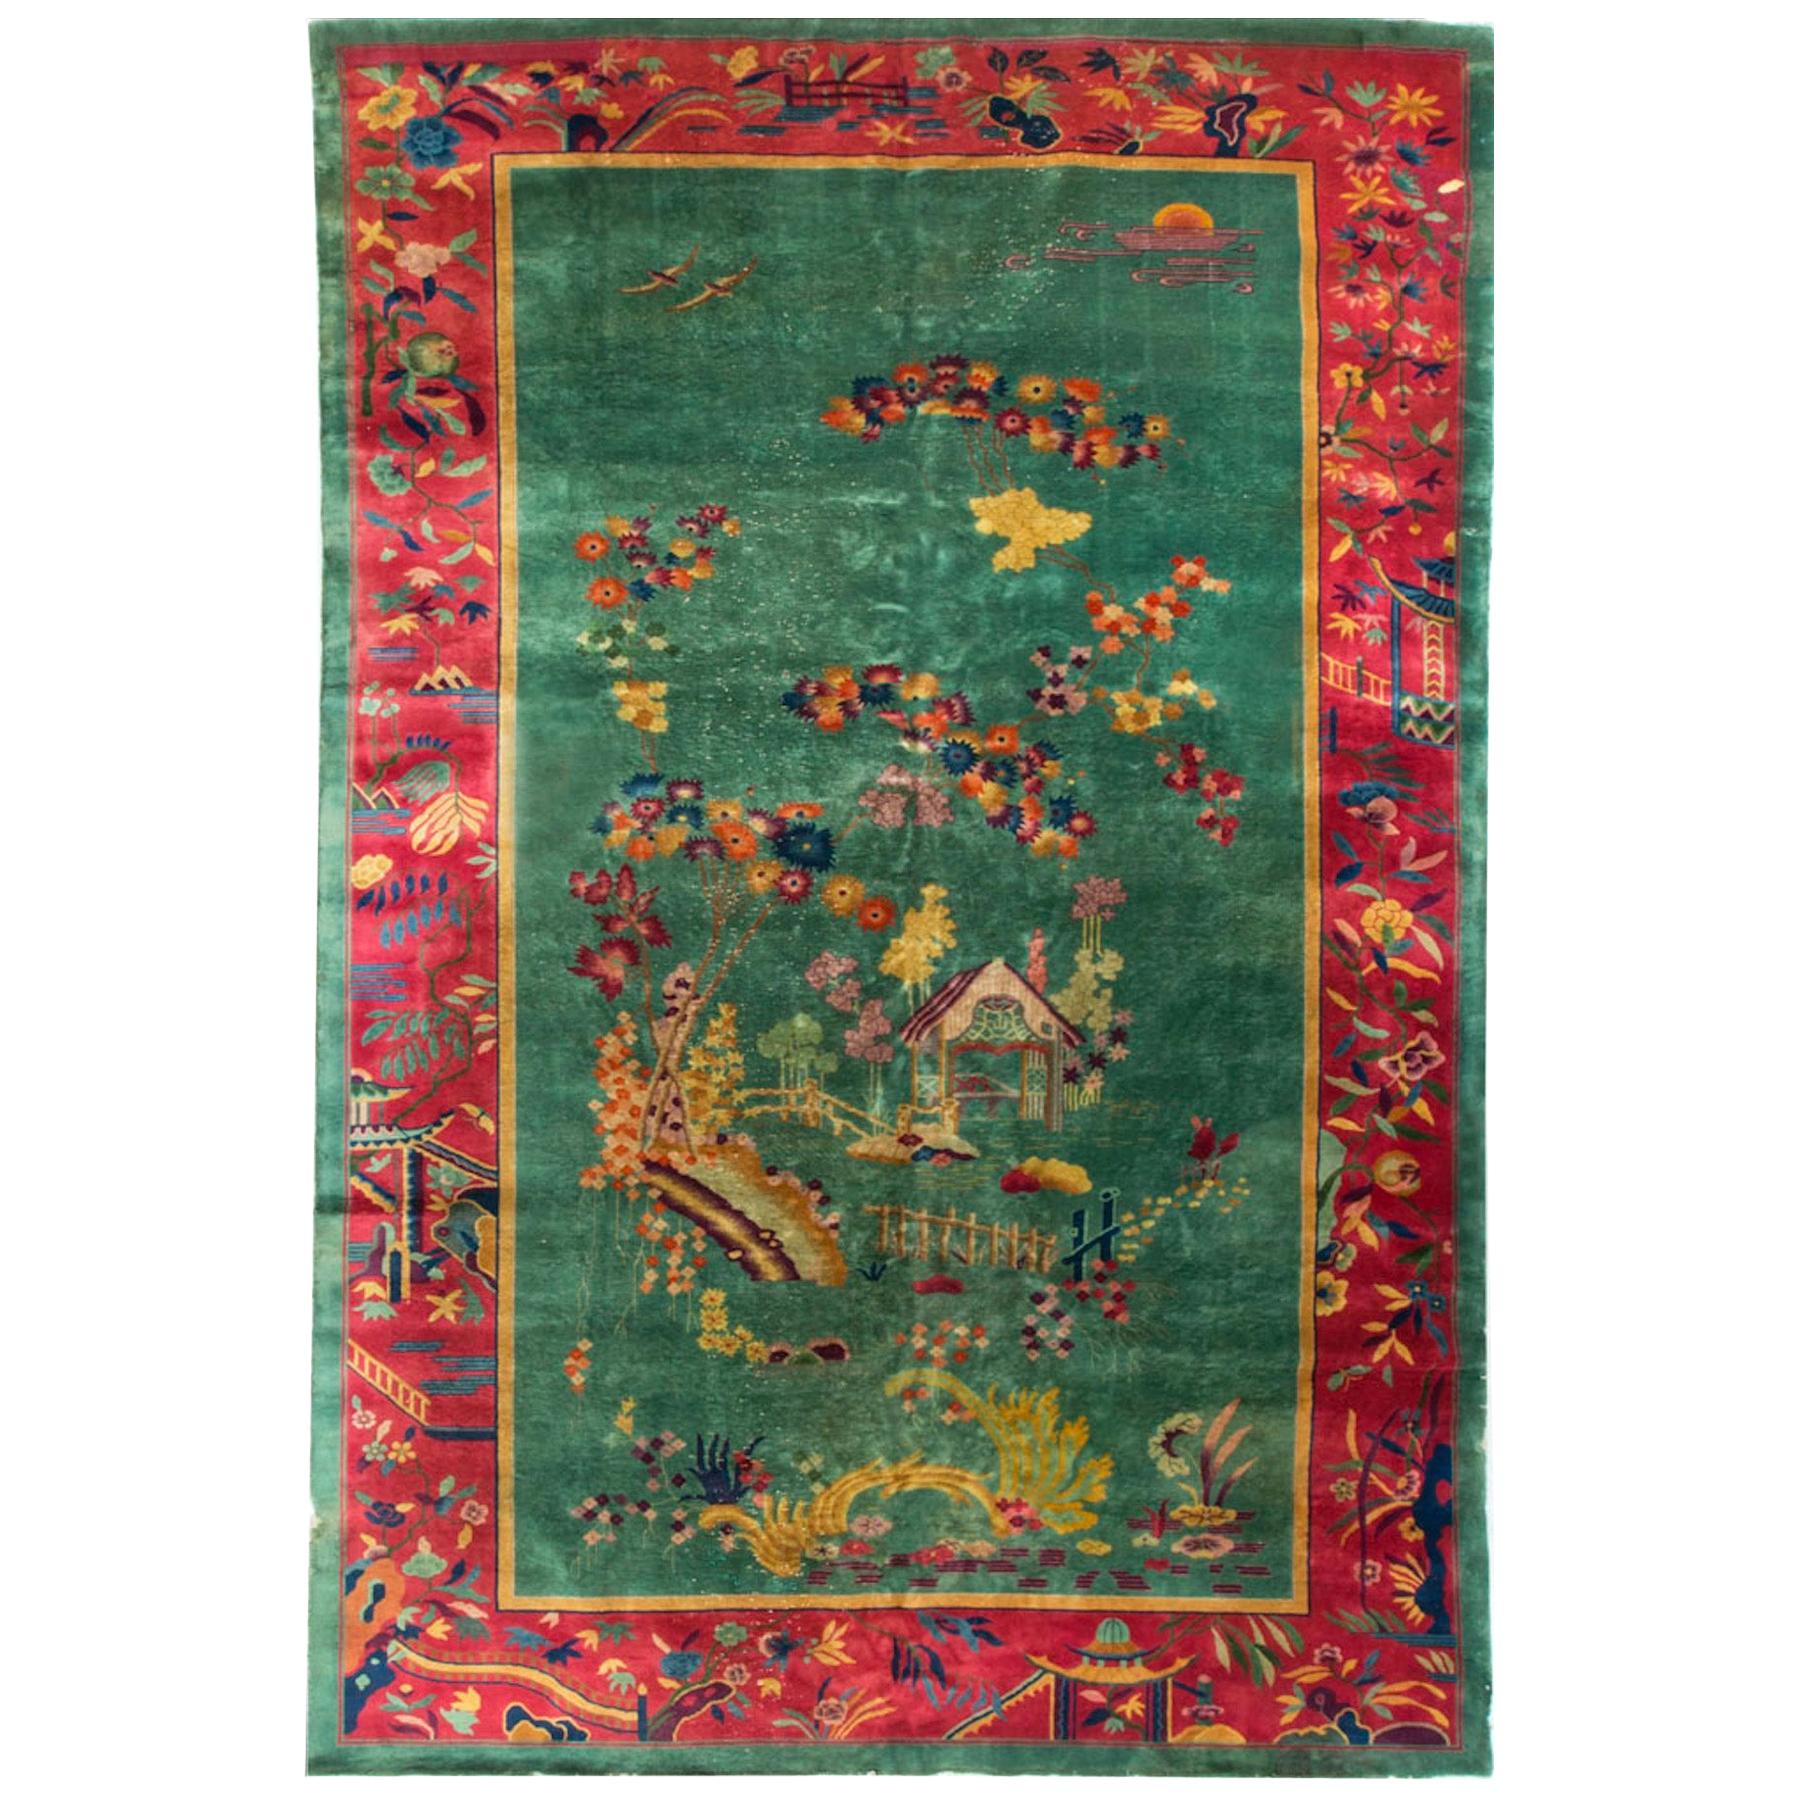 Vintage Nichols Chinese Pictorial Rug, circa 1920  10'8" x 18'5". For Sale